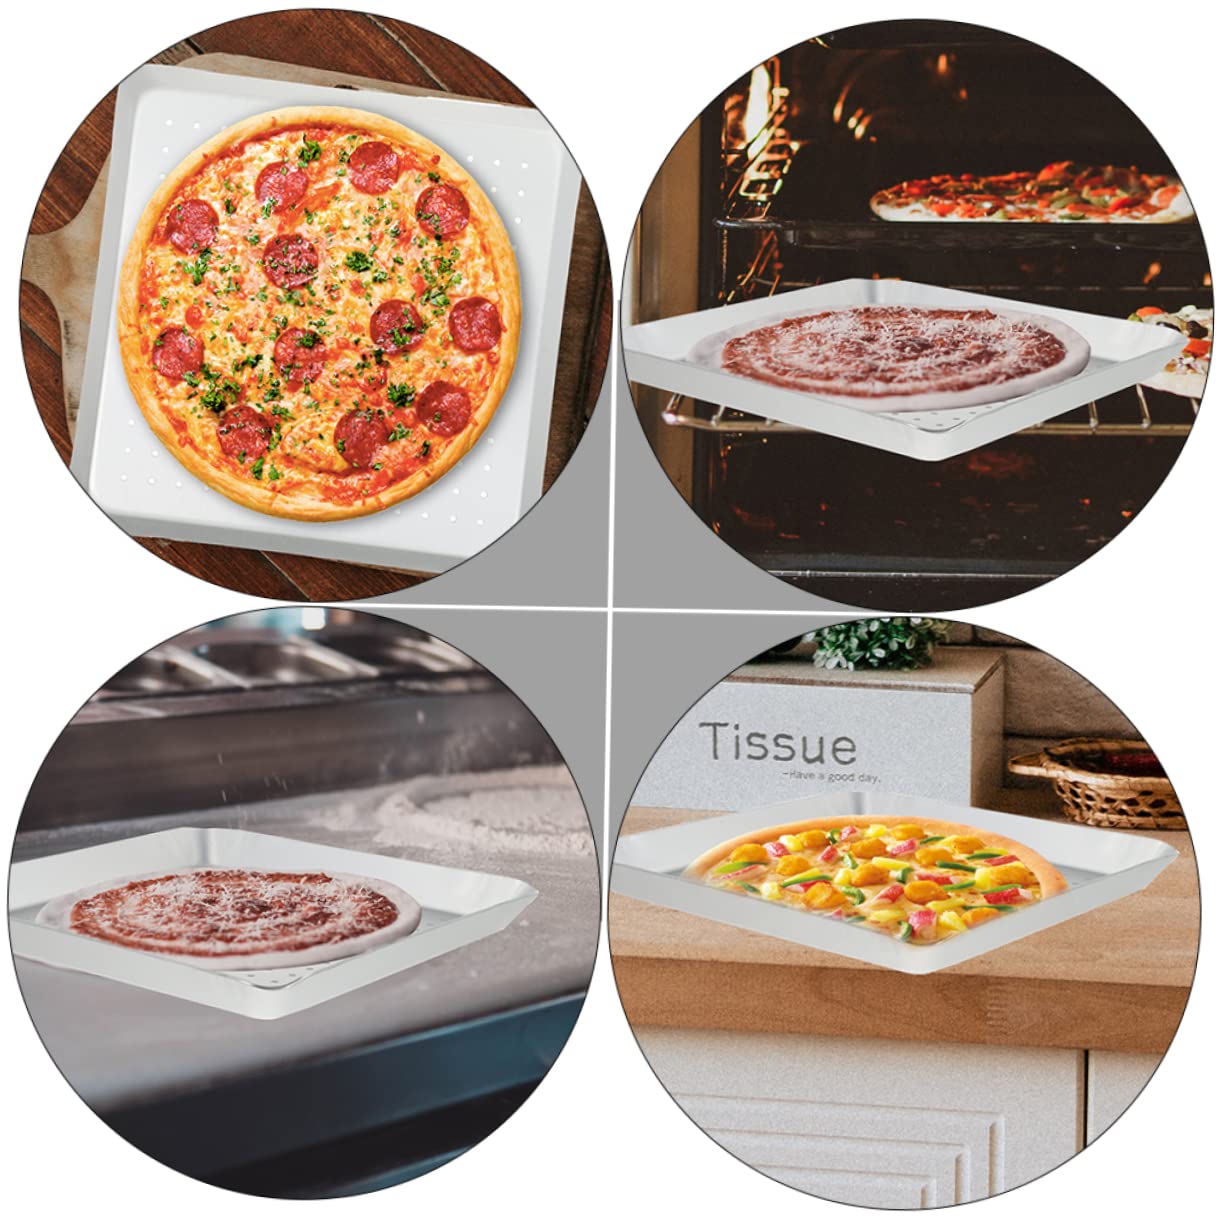 BESTOYARD 1pc Pizza Pan Square Baking Dish Oven Baking Tray Crisper Tray for Oven Toaster Oven Pans Oven Tray Square Pan Pasties Pizza Baking Tray Baking Pan Stainless Steel Aluminum Alloy